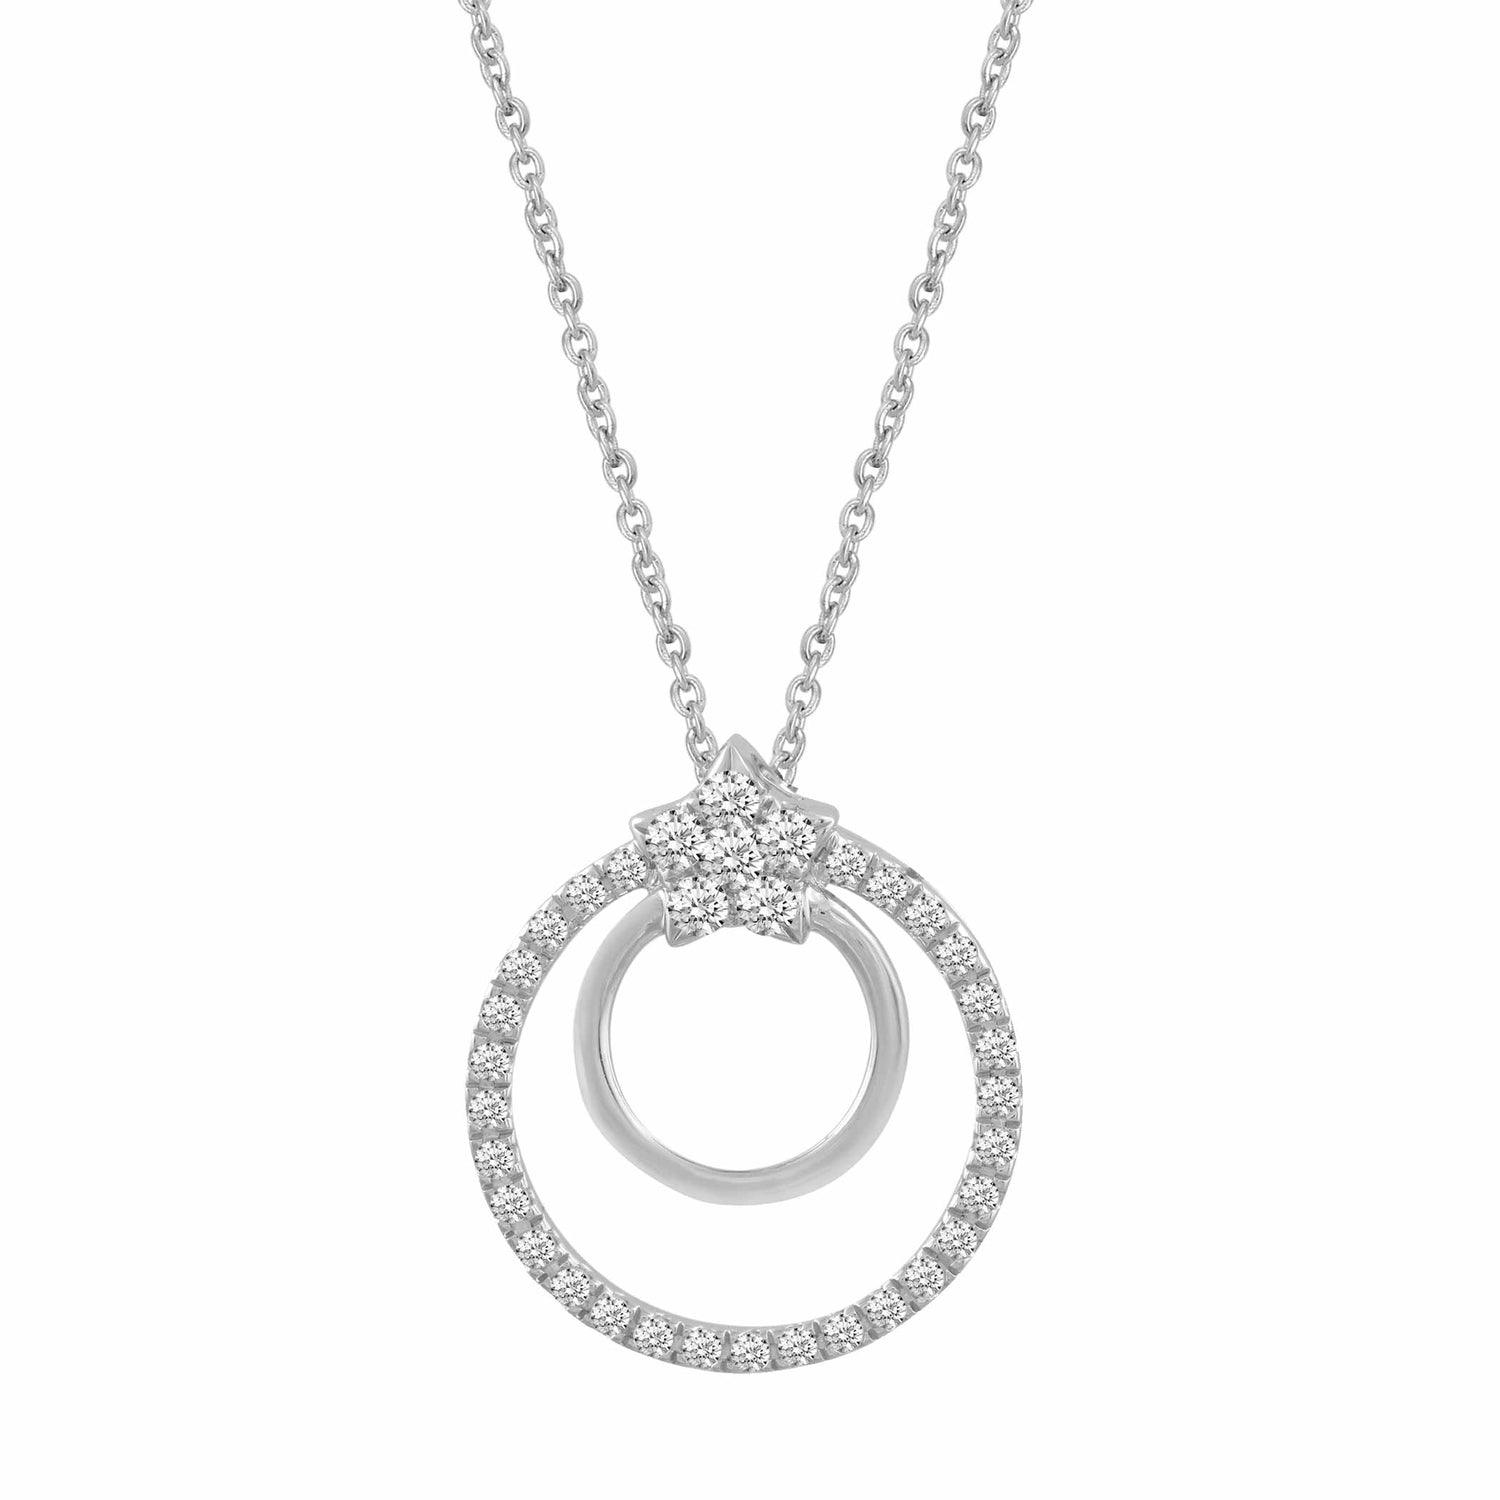 1/3 CT TW Diamond Star Circle Pendant Necklace in 925 Sterling Silver